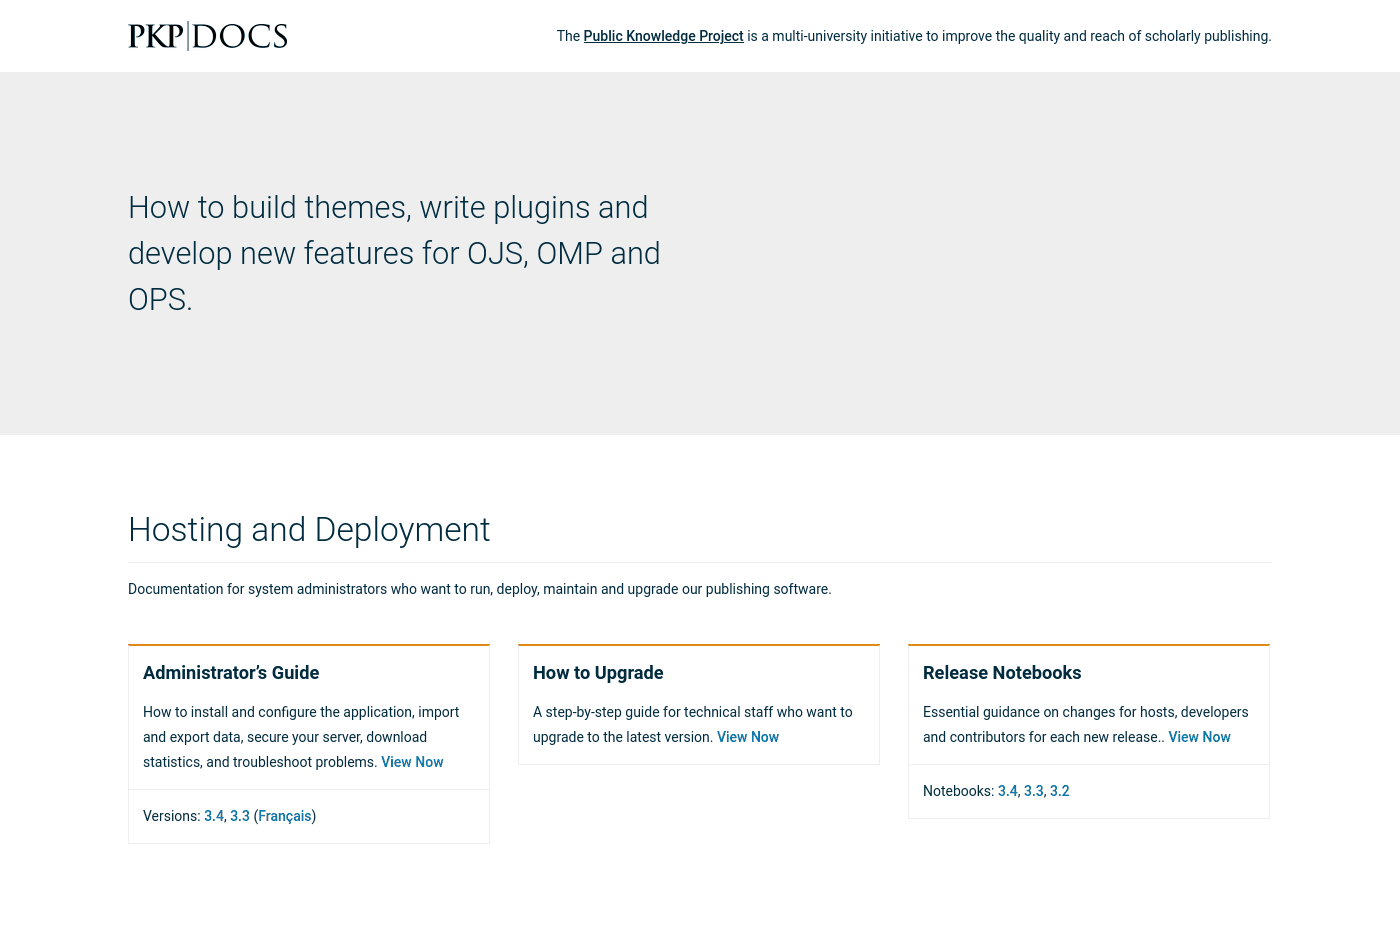 Screenshot of the technical documentation hub for OJS and OMP